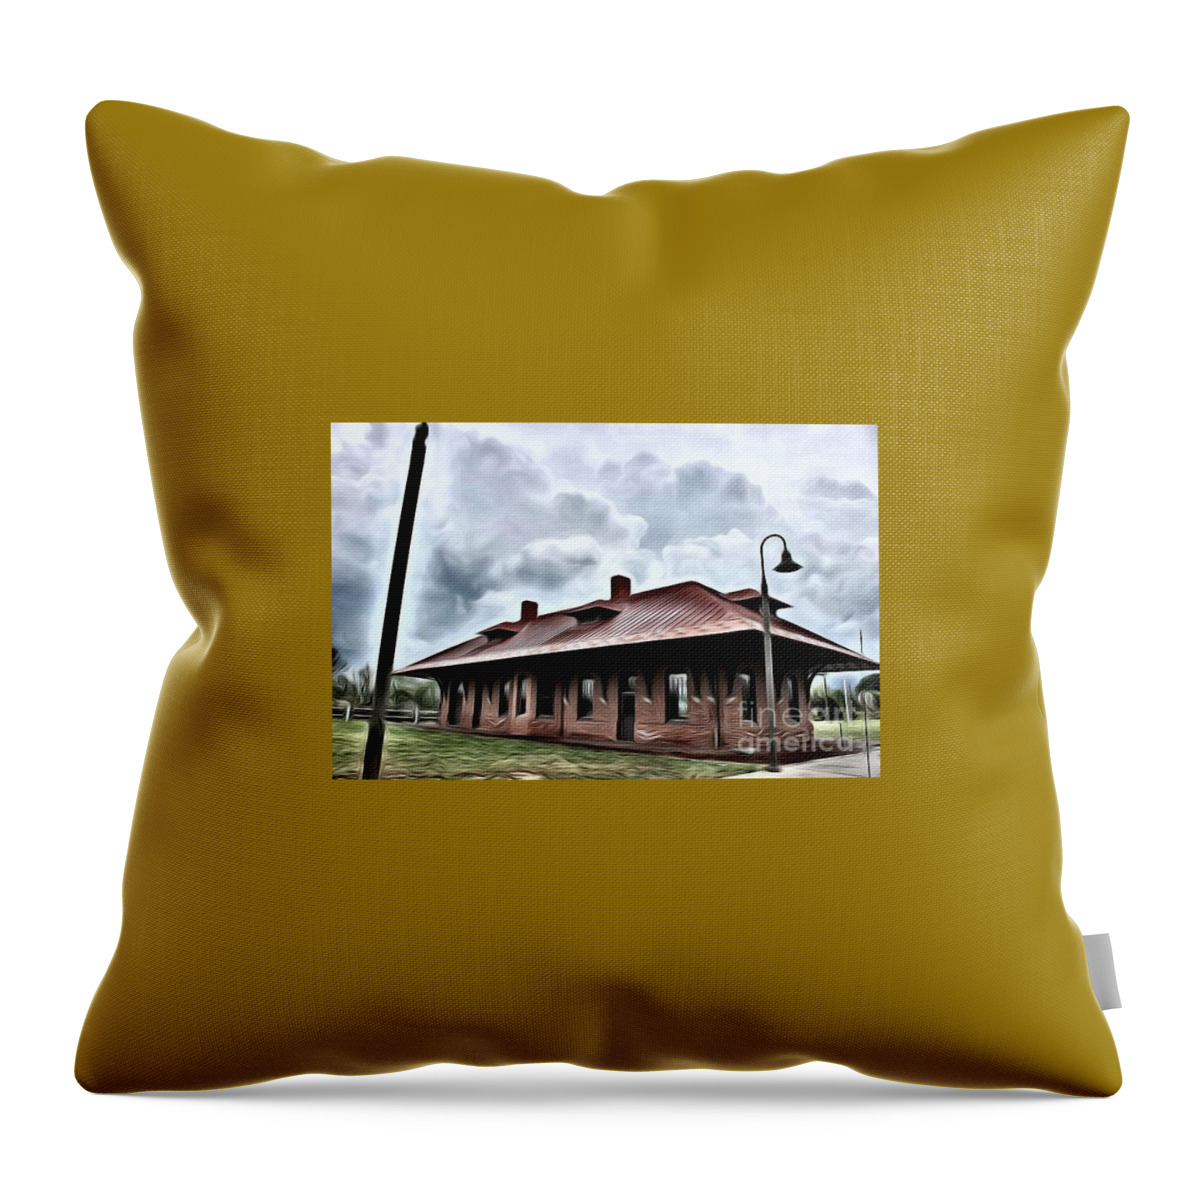 Old Burkeville Station Throw Pillow featuring the mixed media Old Burkeville Station by Robin Coaker